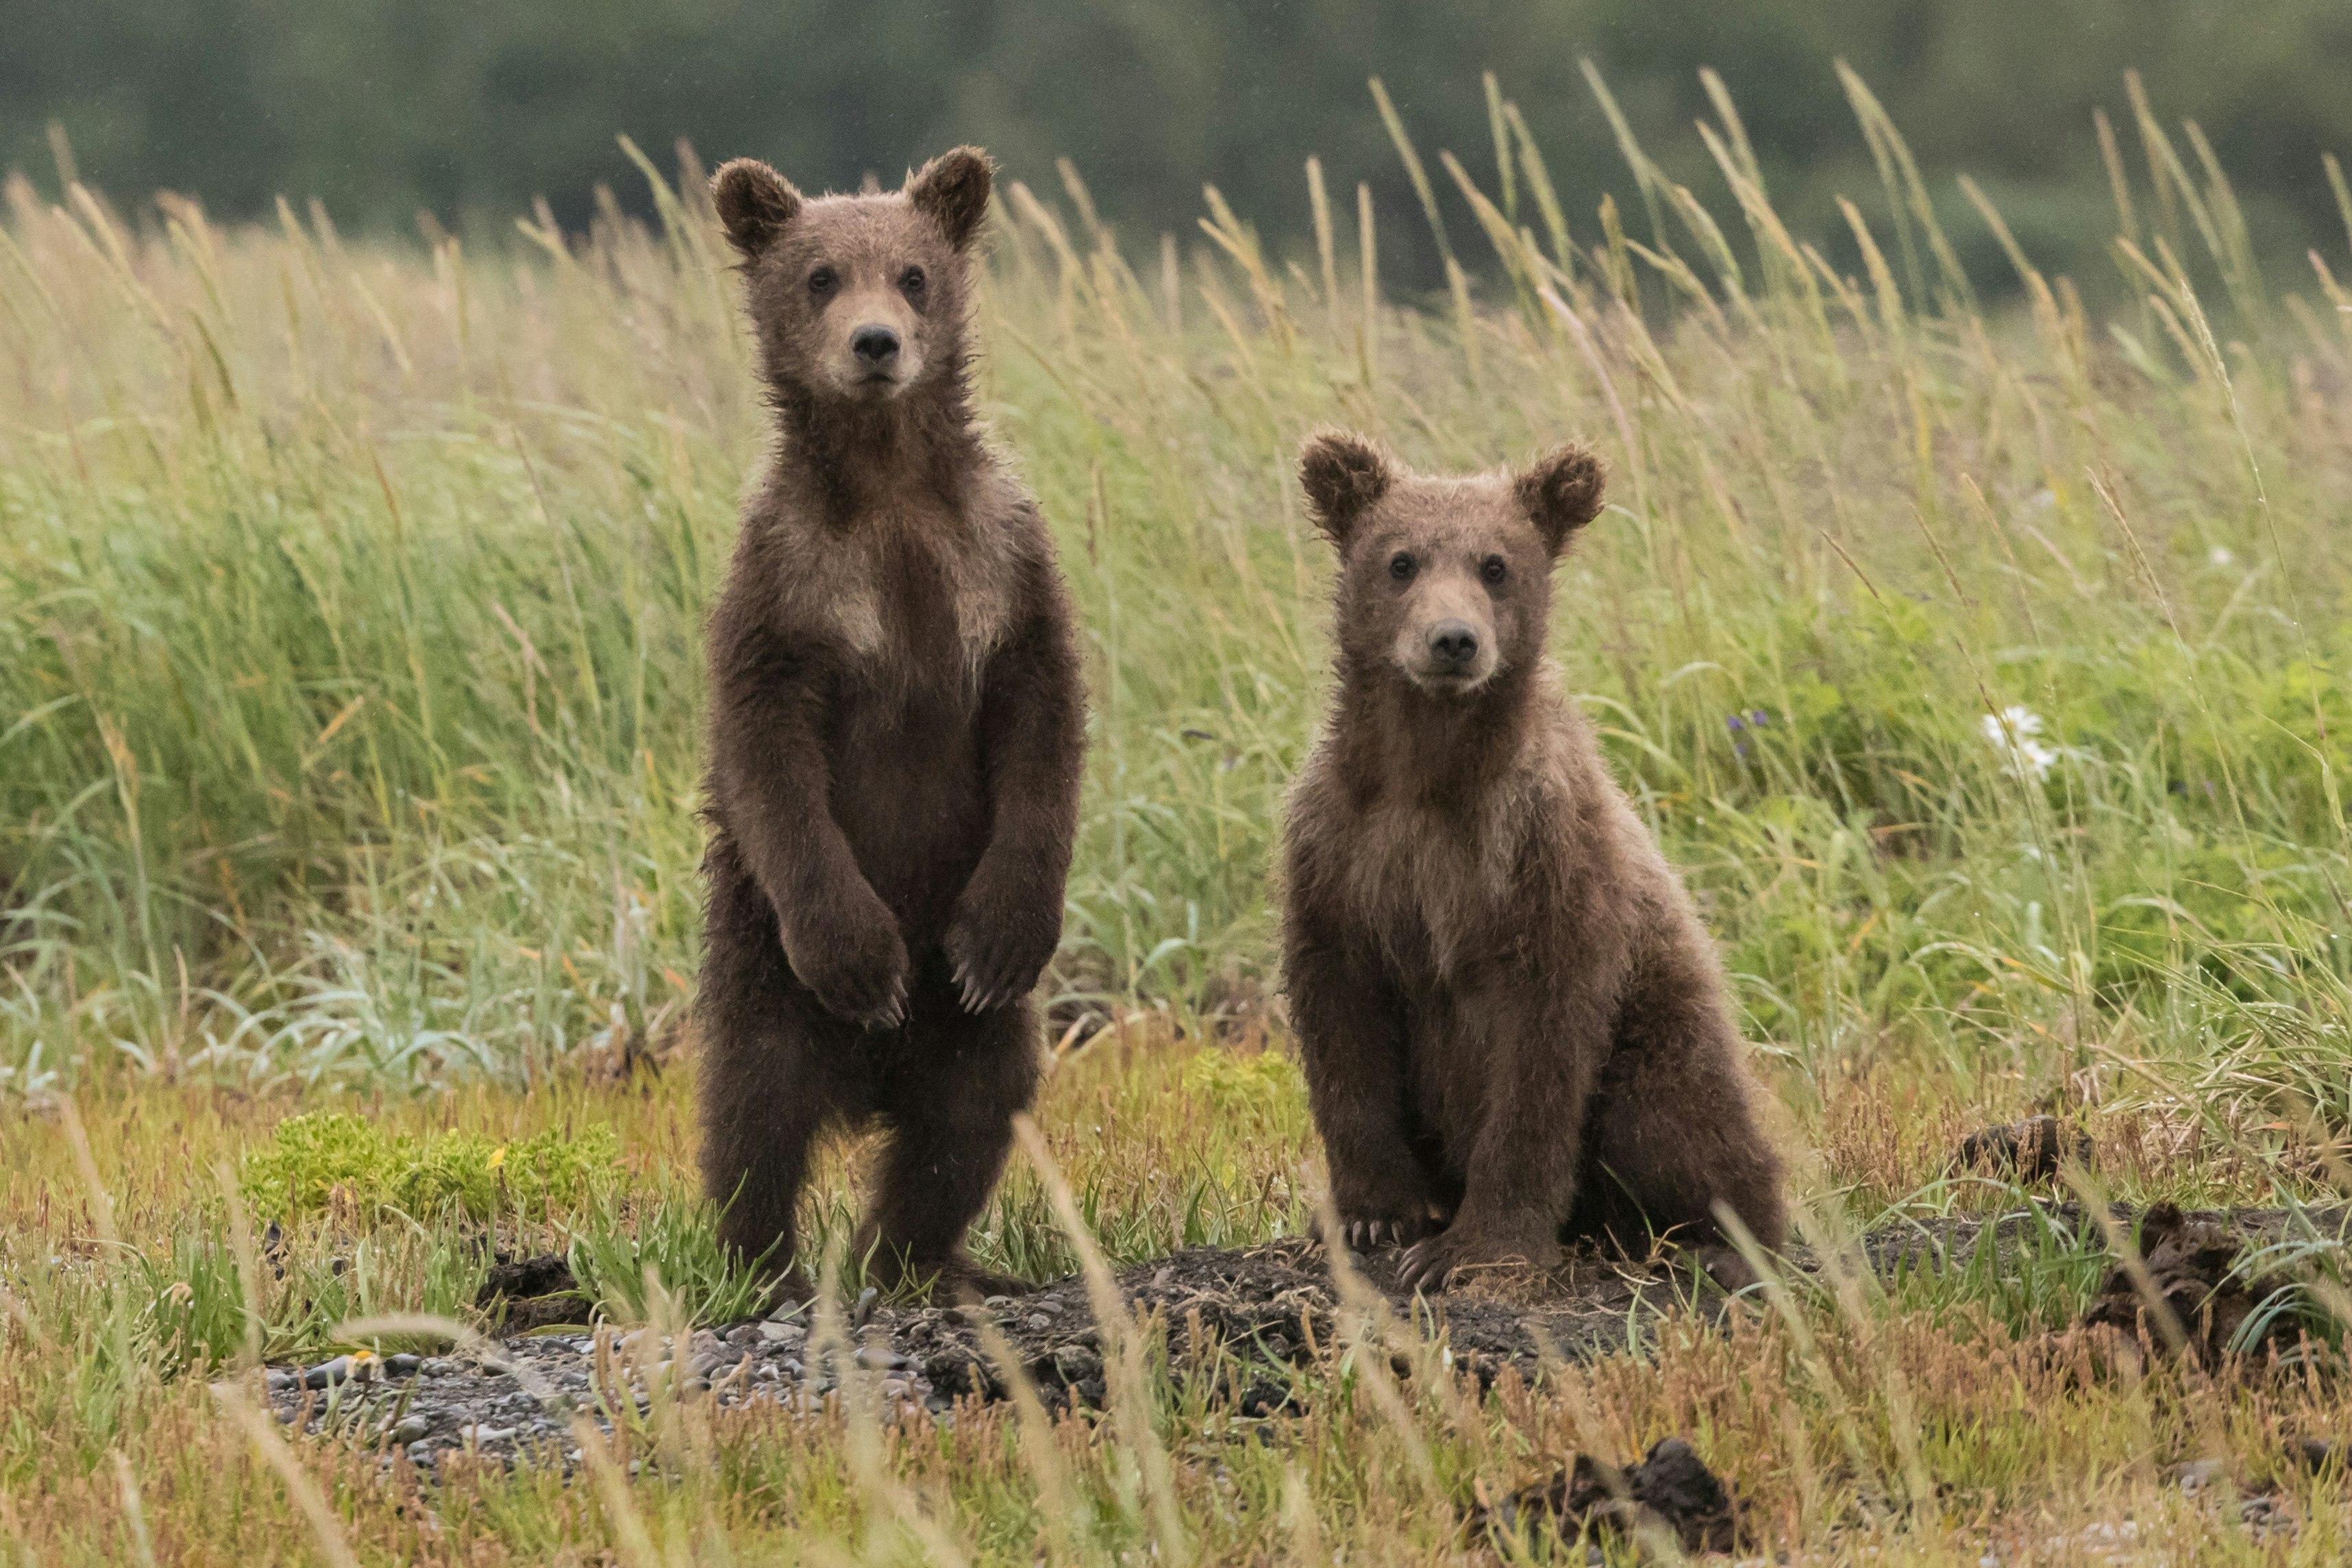 Keeping Bears and Humans Safe